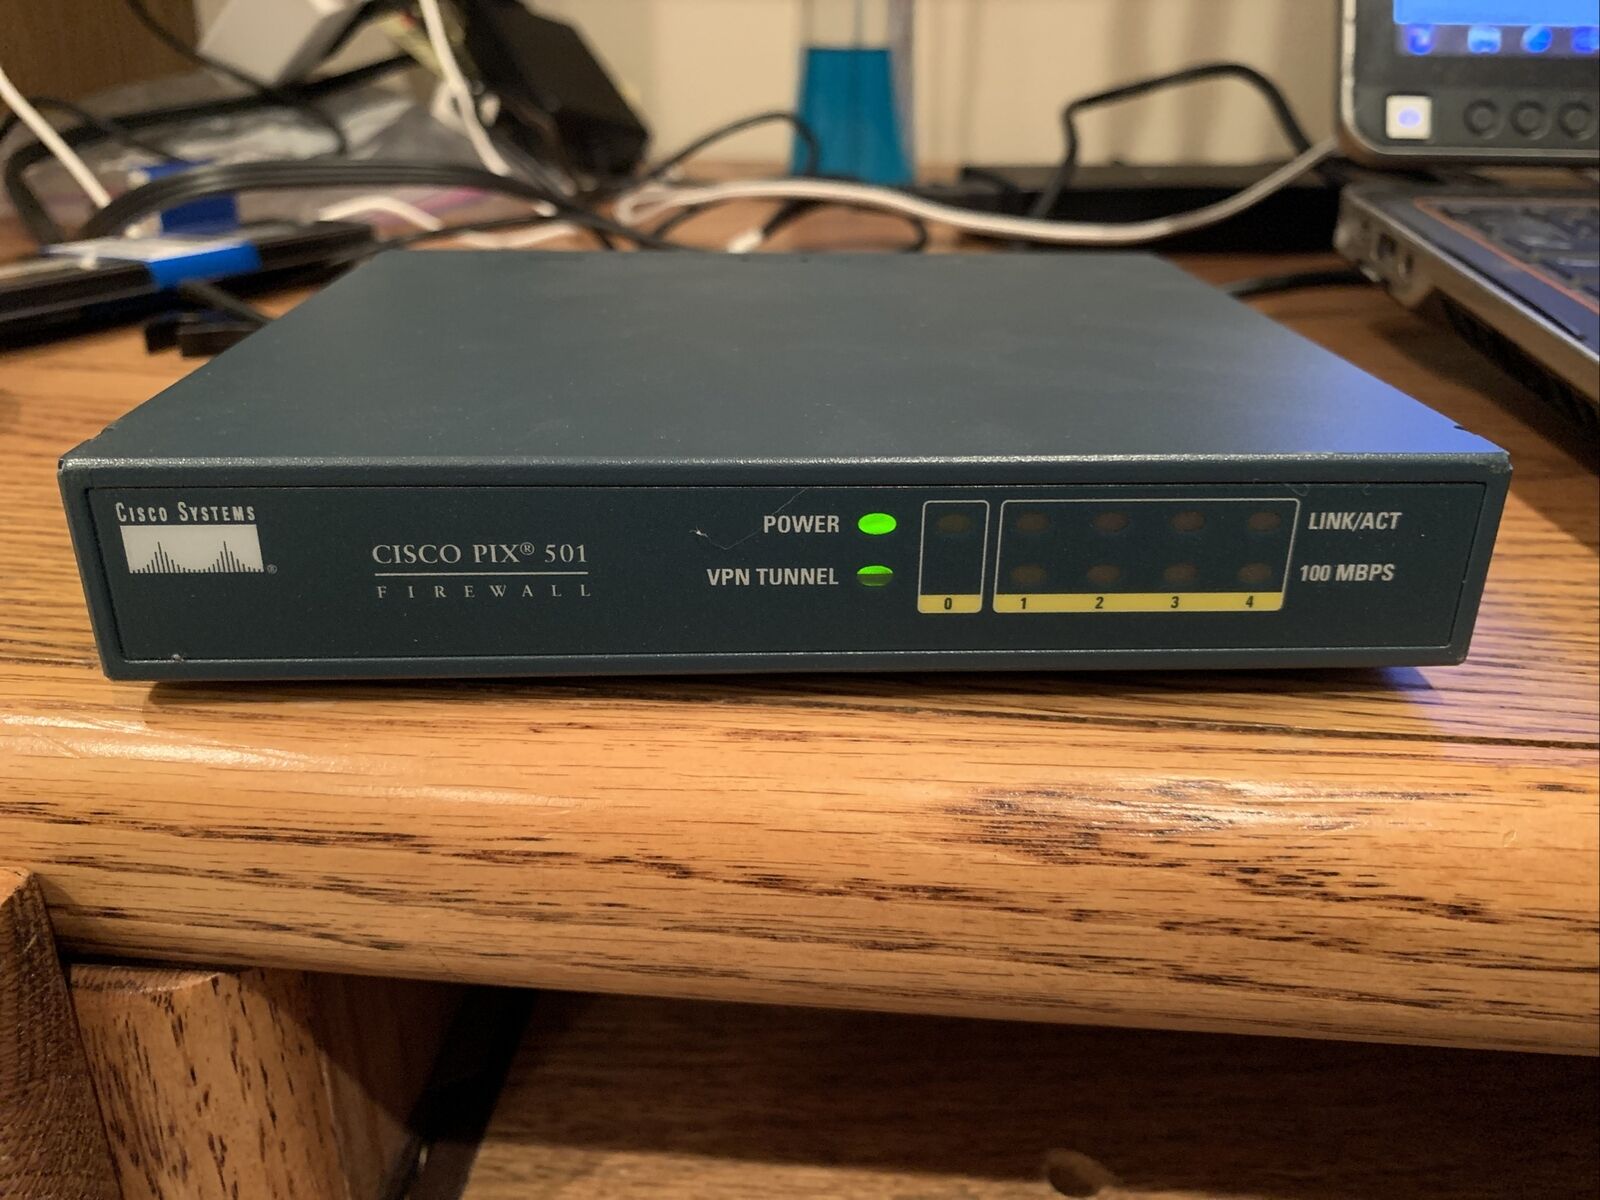 Cisco PIX 501 W/Power Supply - Powers On. No Tests Run. Sold As Is. No Returns.